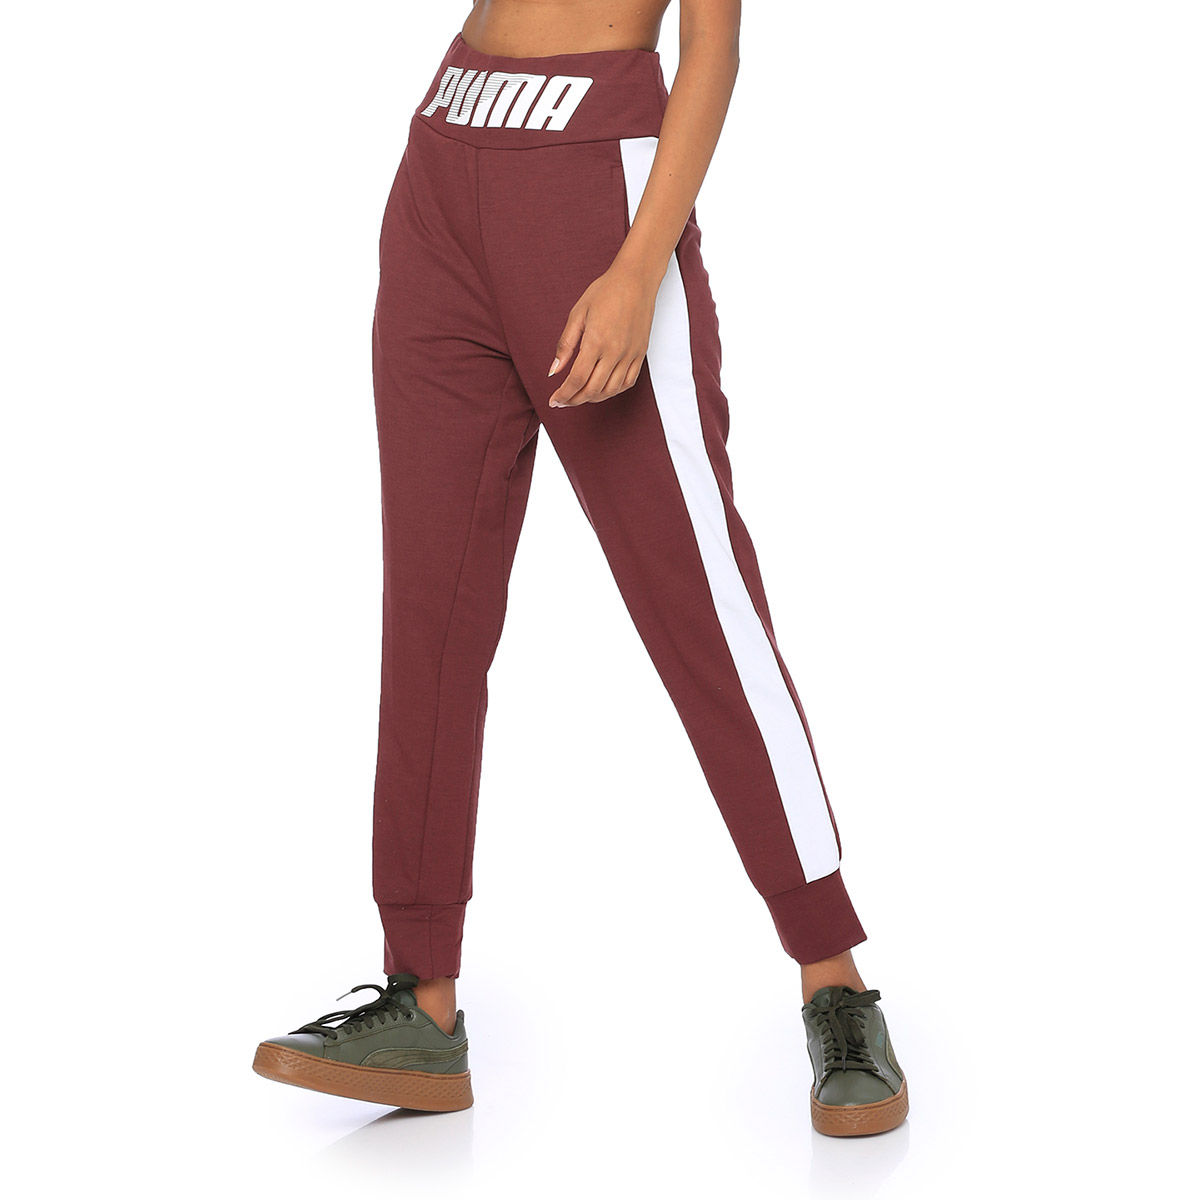 Best Track Pants In India 2023 For A Sporty Look | Top-10 List